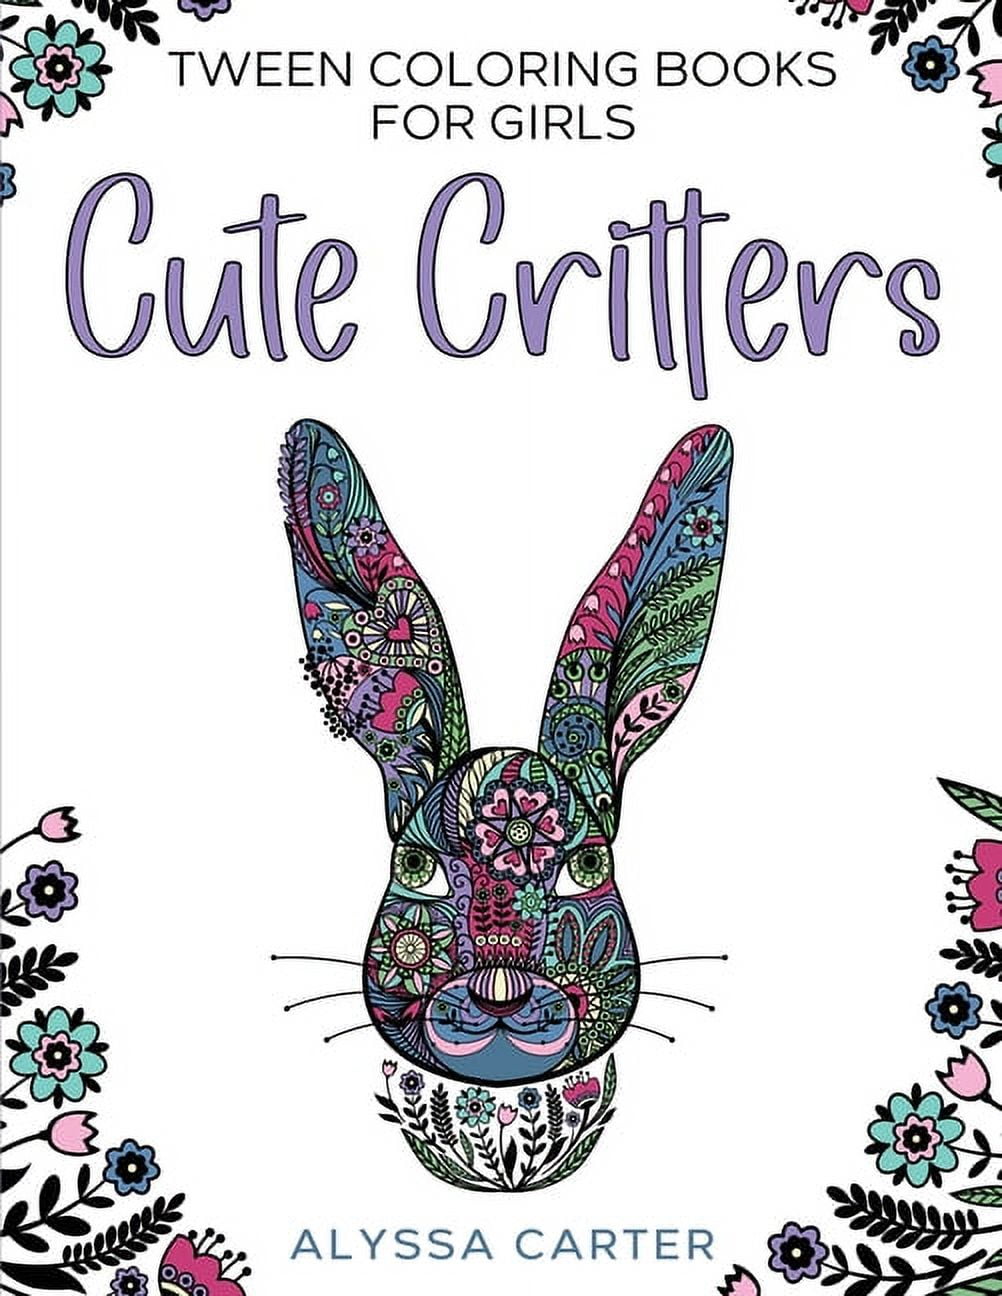 Coloring Books For Girls: Cute Animals: Beautiful Relaxing Art Therapy Kids  Teen Young Adults Children Ages 2-4 6-8 4-8 8-10 9-12 12-14 11-14 14 a book  by Kids Coloring Art, Penguin For Kids, and Jan Baum